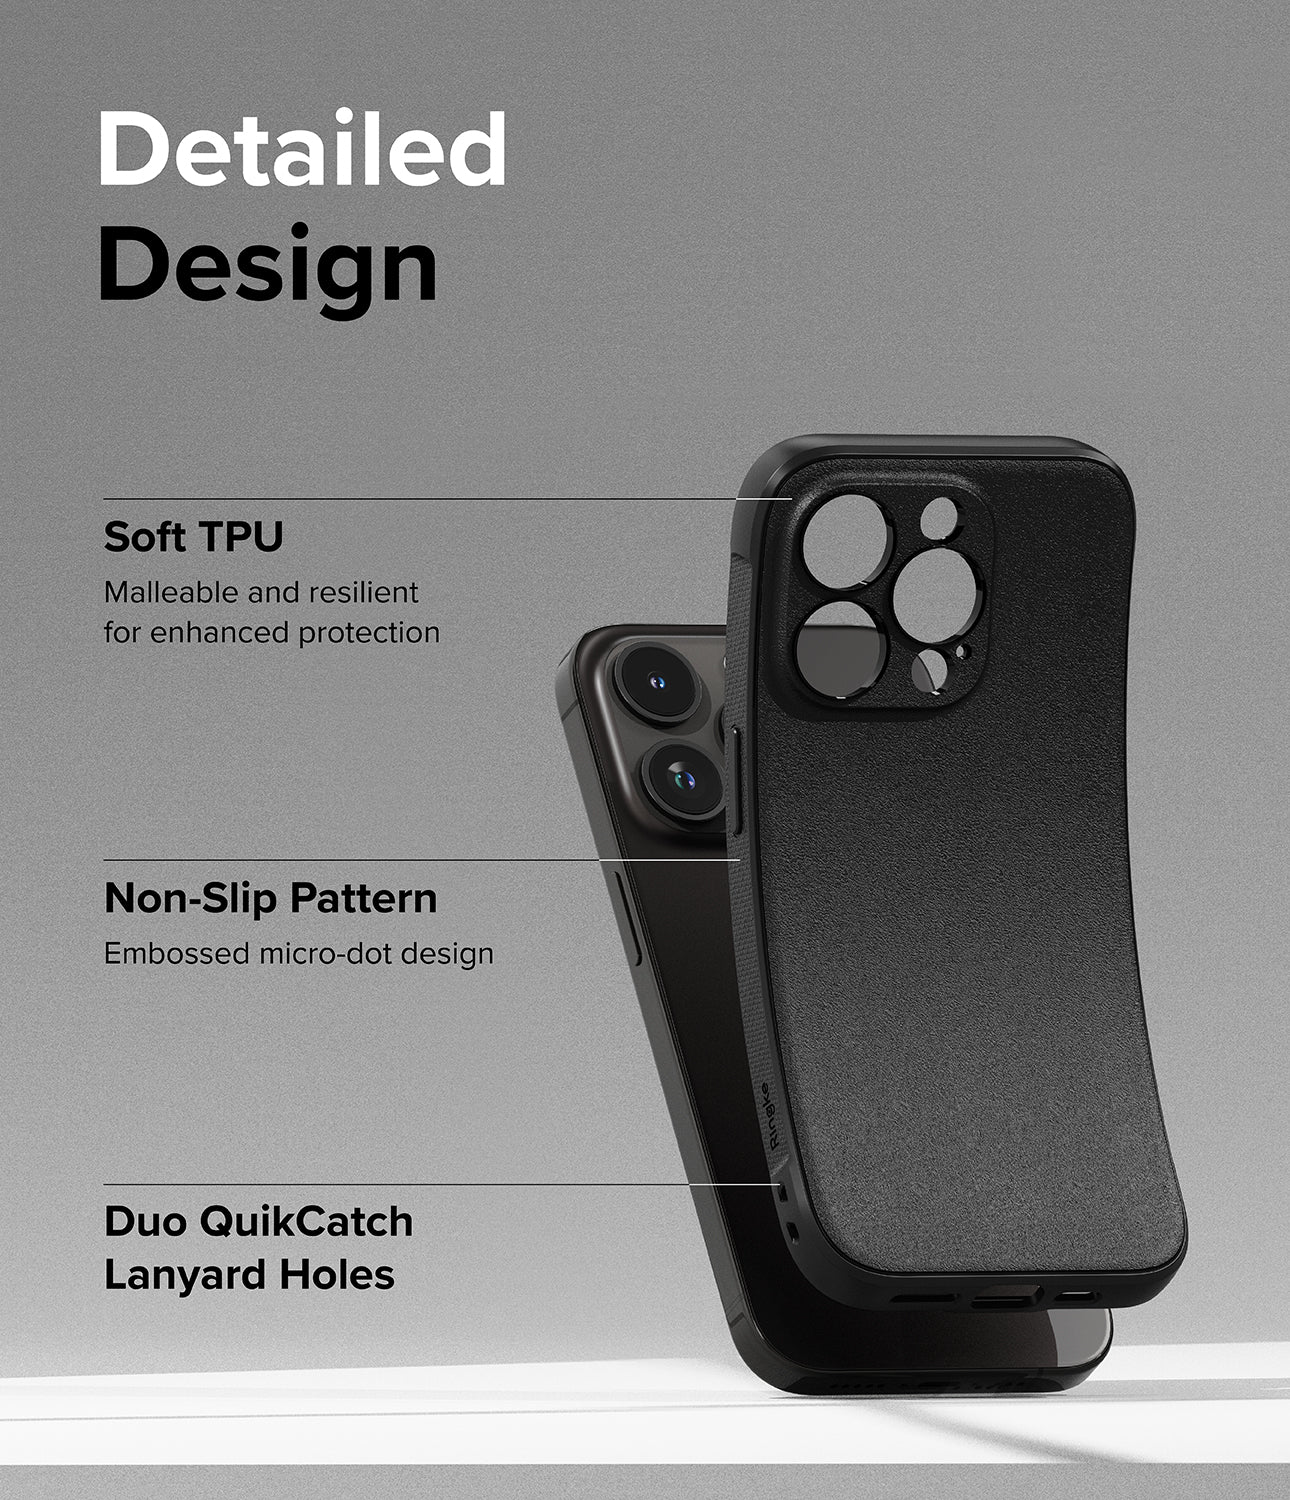 iPhone 15 Pro Case | Onyx - Black - Detailed Design. Malleable and resilient for enhanced protection with Soft TPU. Embossed micro-dot design. Non-Slip Pattern. Duo QuikCatch Lanyard Holes.